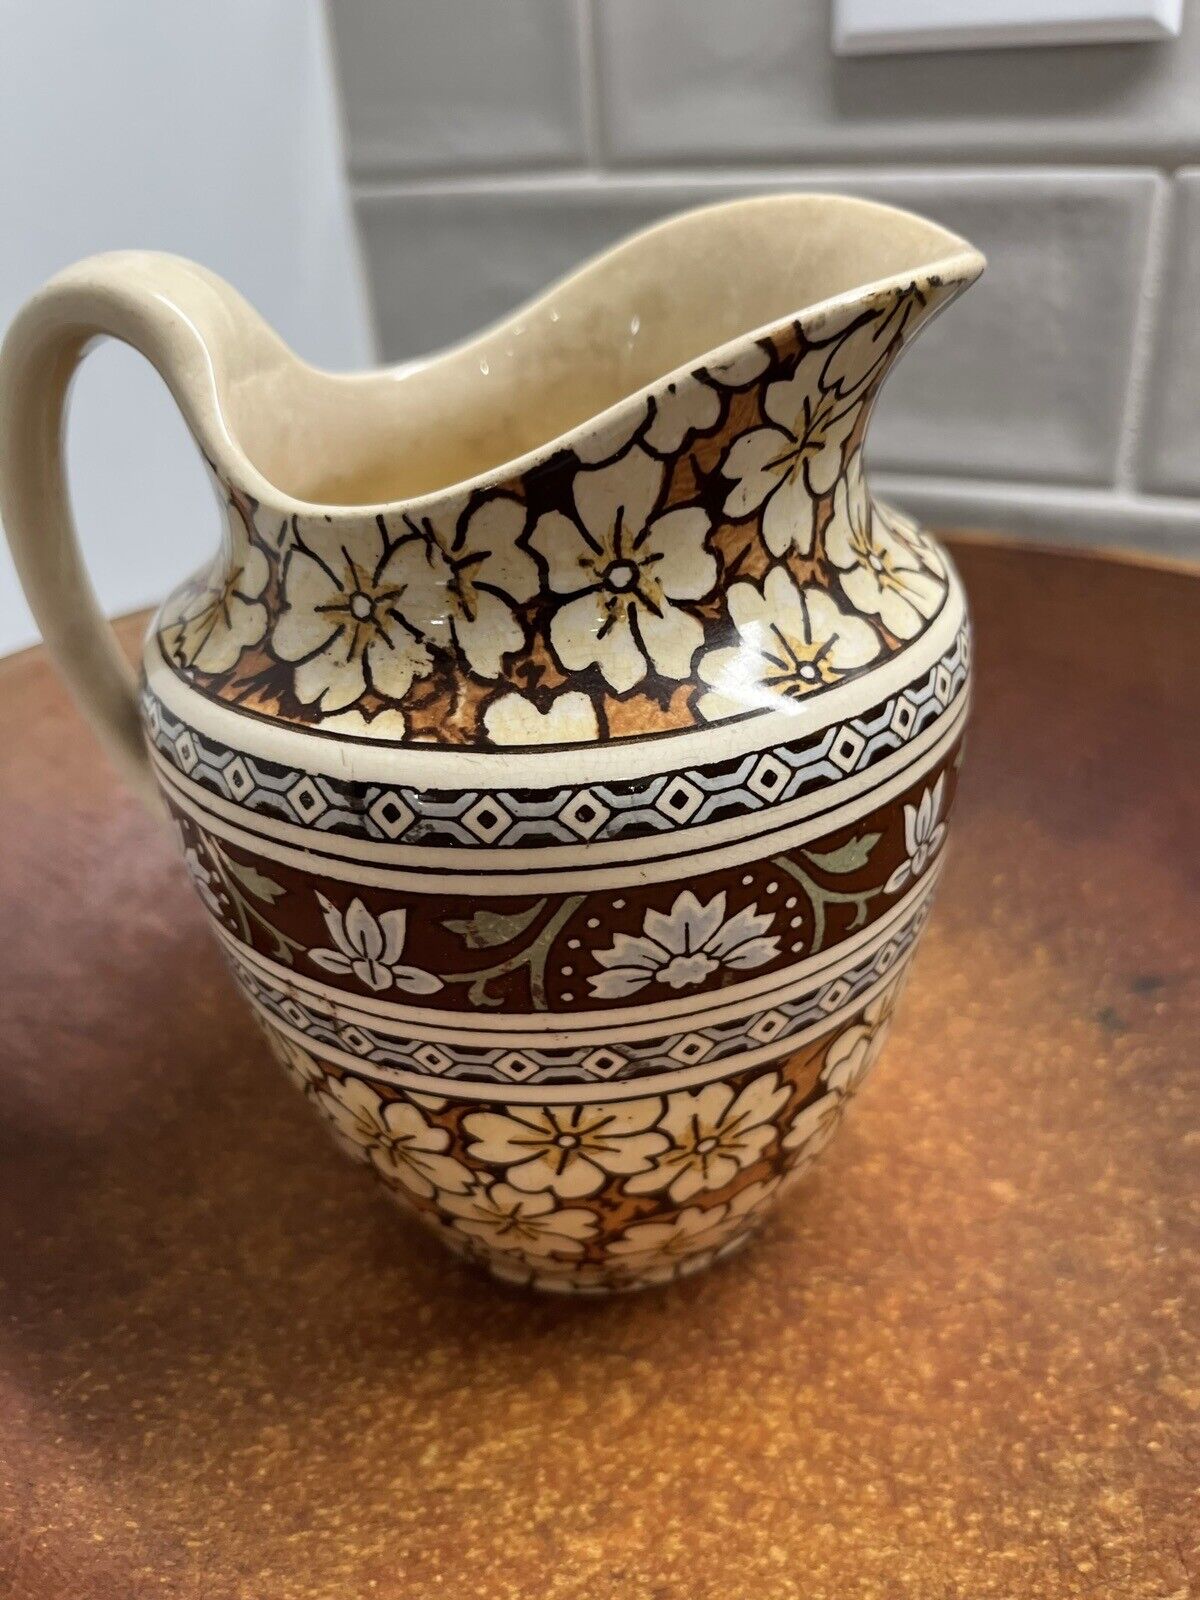 Vintage Brown And Blue Floral Ceramic Pitcher. Stained And Crazed